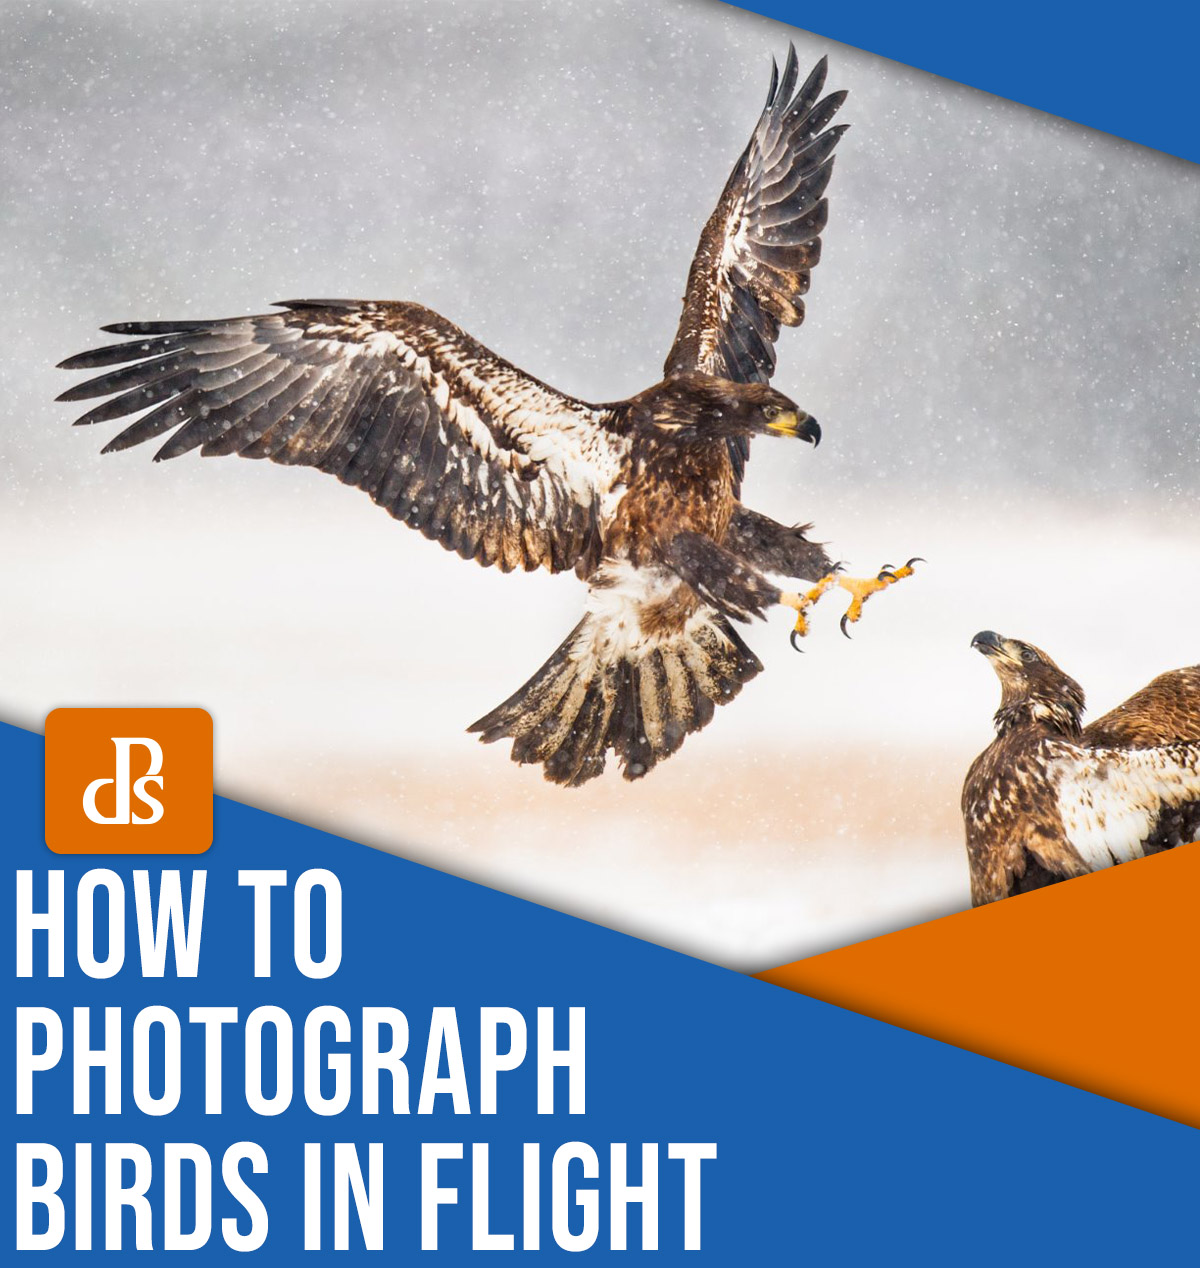 How to photograph birds in flight